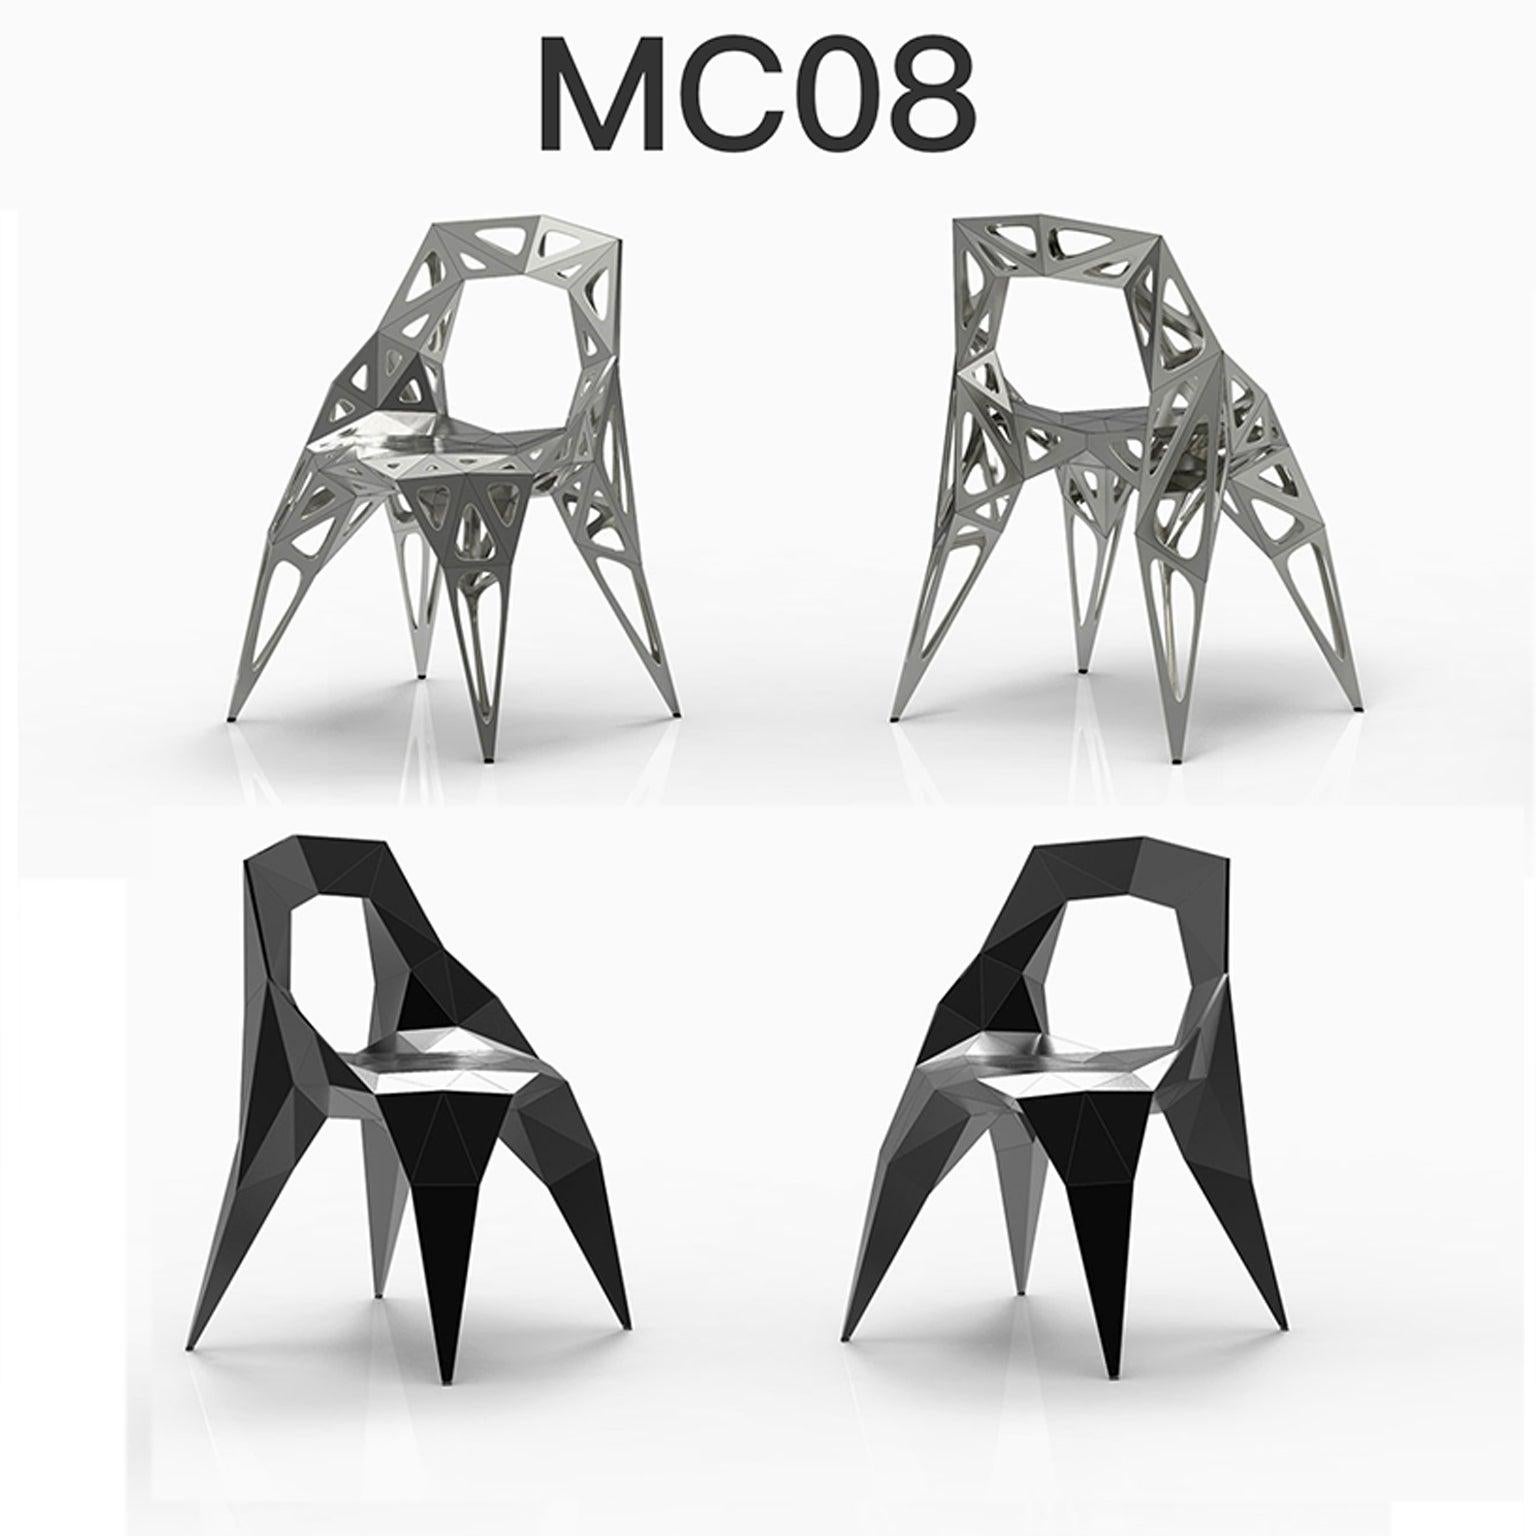 customizable
Outdoor and indoor
4 official types chairs / available
solid
dots
frame
2 colors official / available / finish in polish/matt
black
silver

Furniture designer Zhoujie Zhang is known for the integration of automated digital